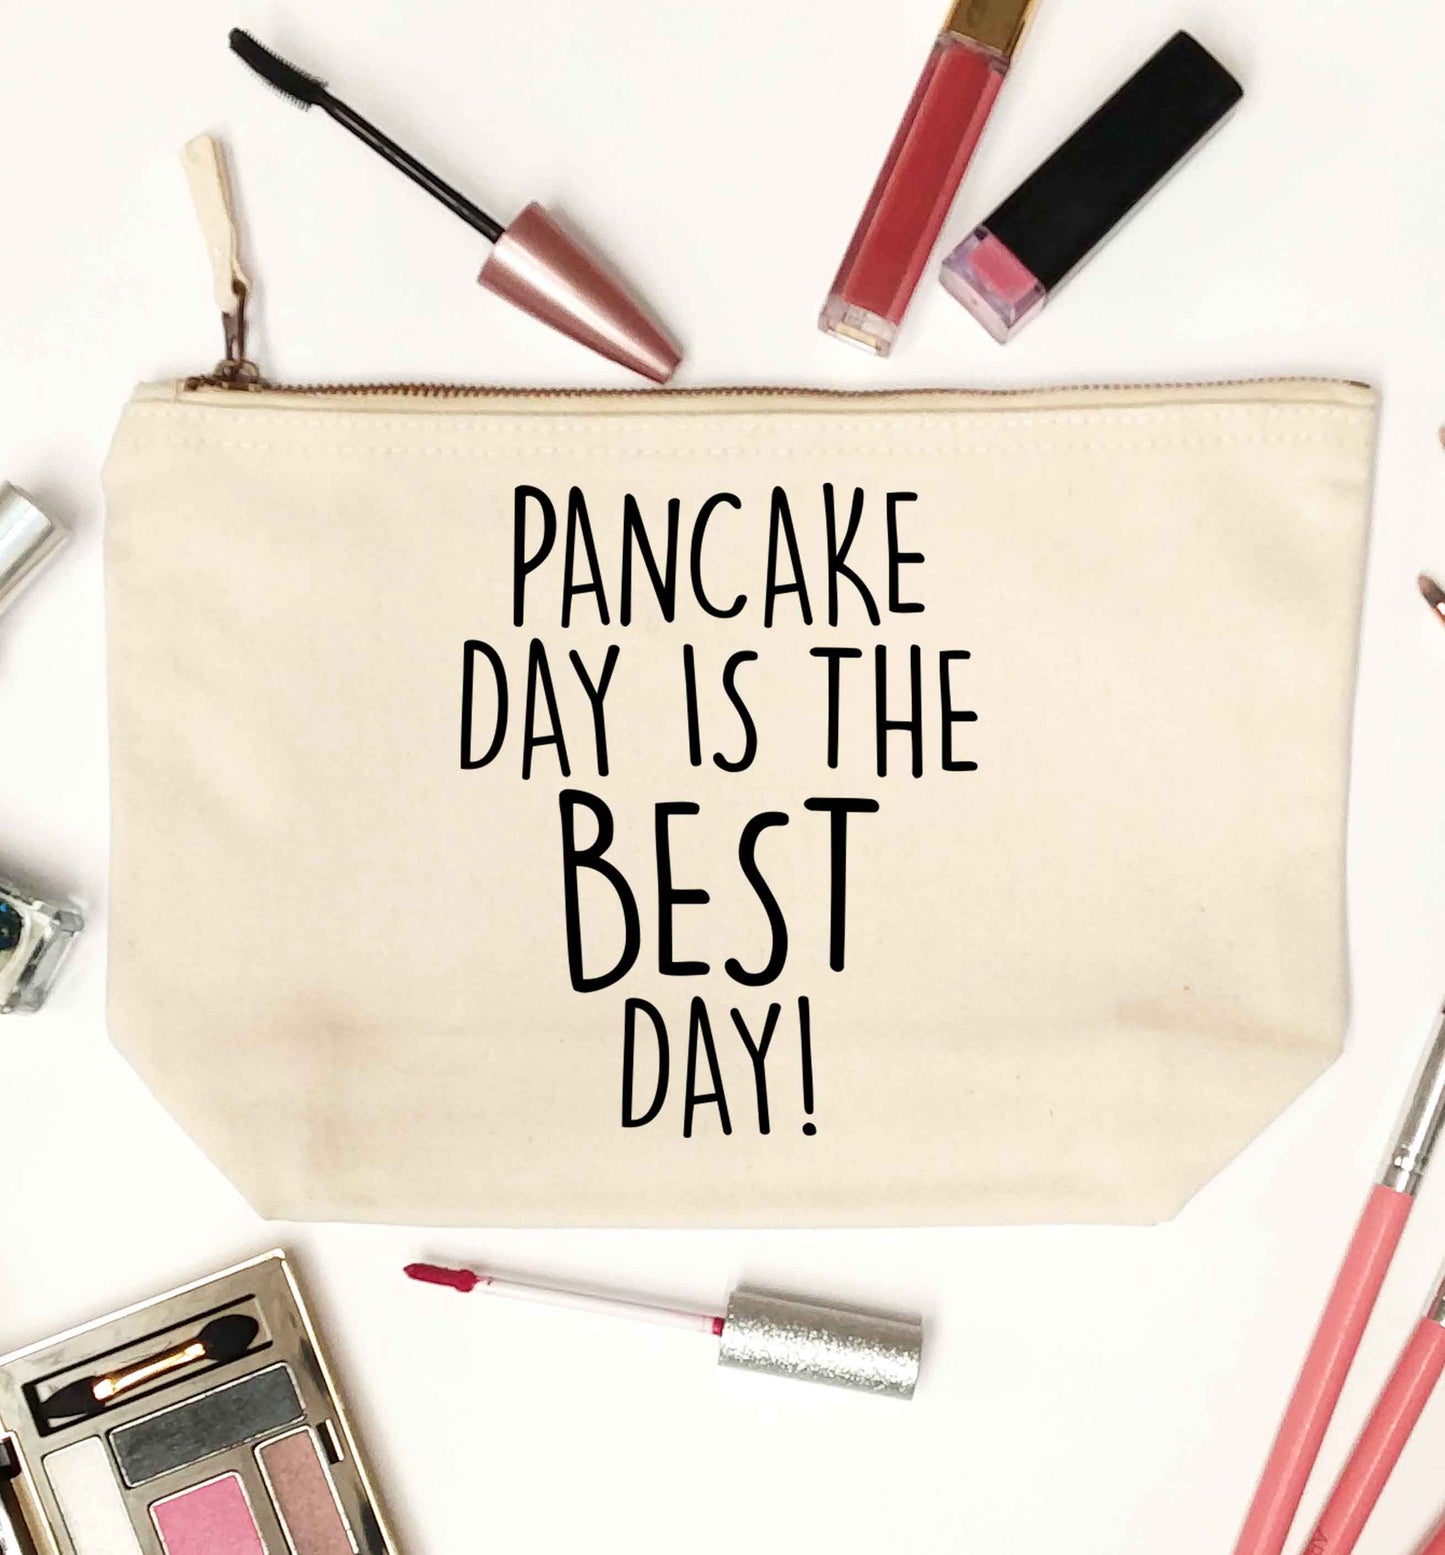 Pancake day is the best day natural makeup bag